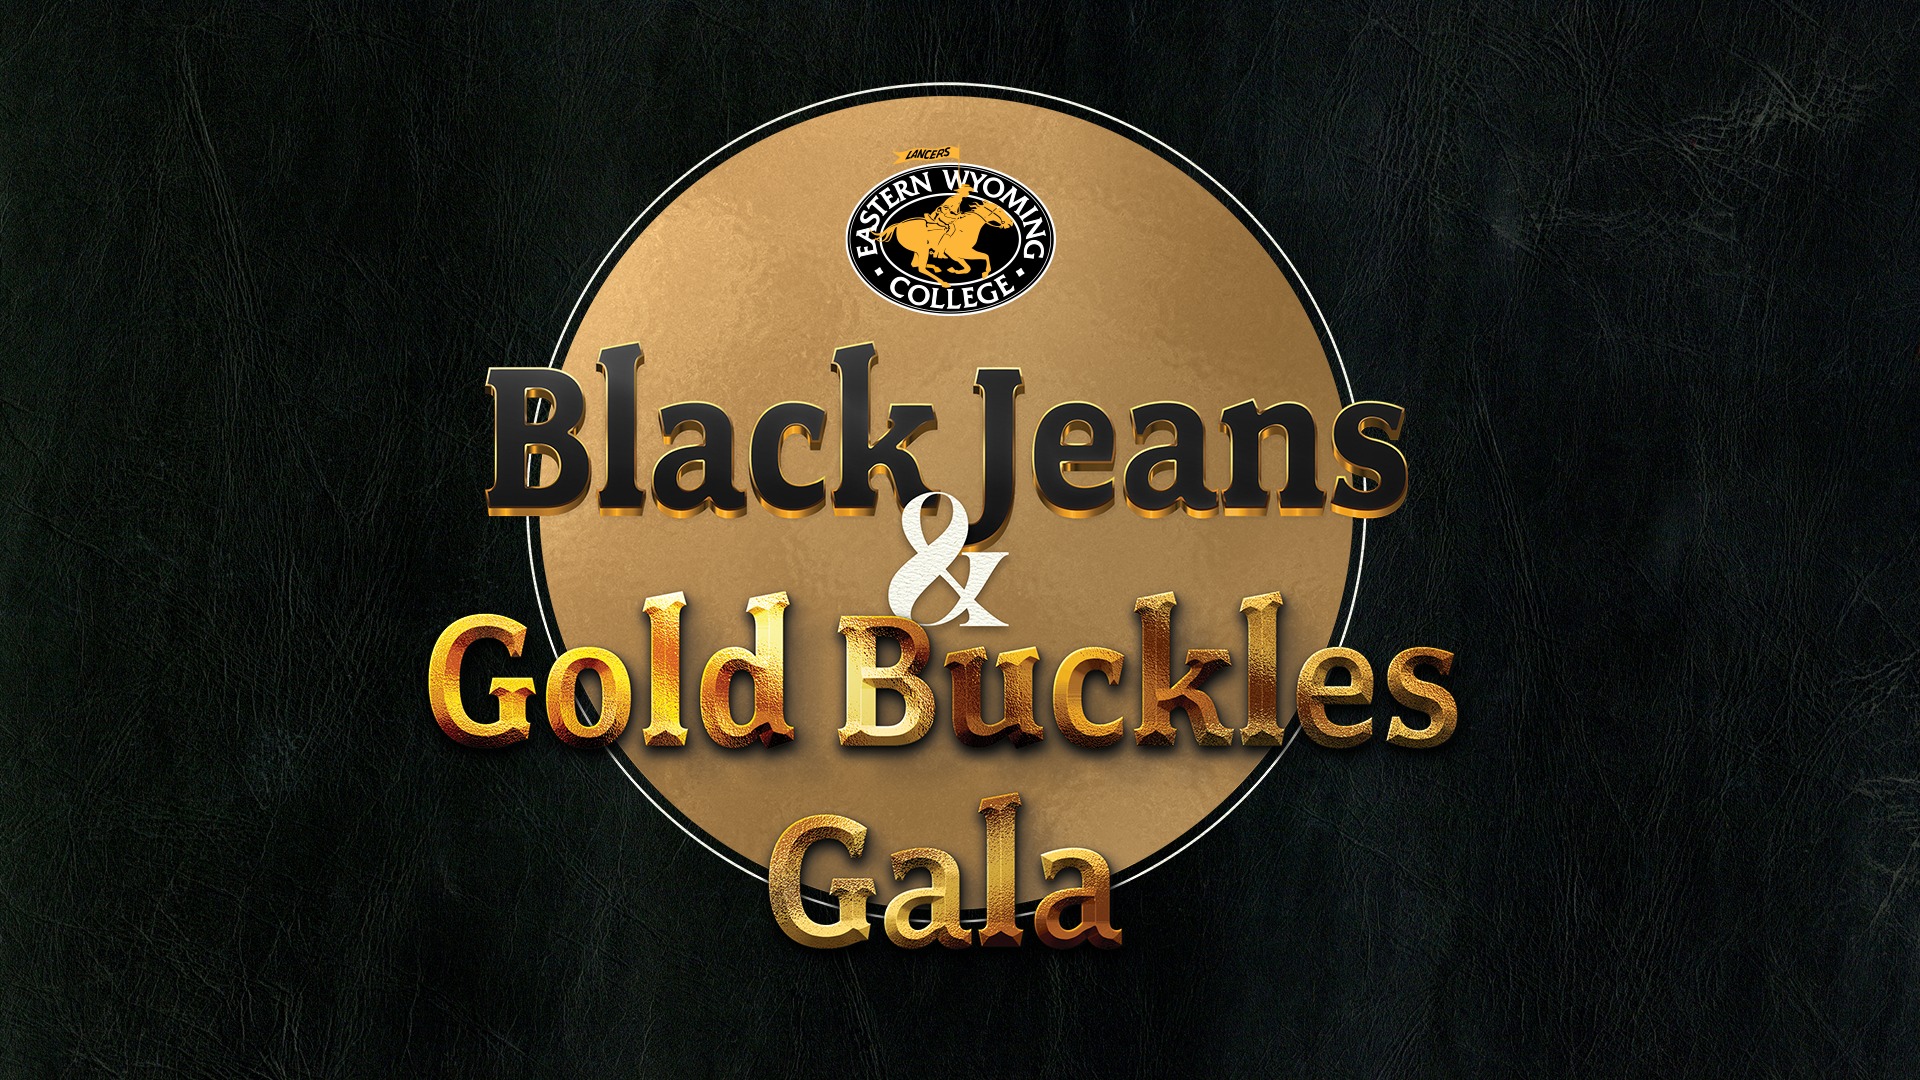 a flyer for the Black Jeans & Gold Buckles Gala